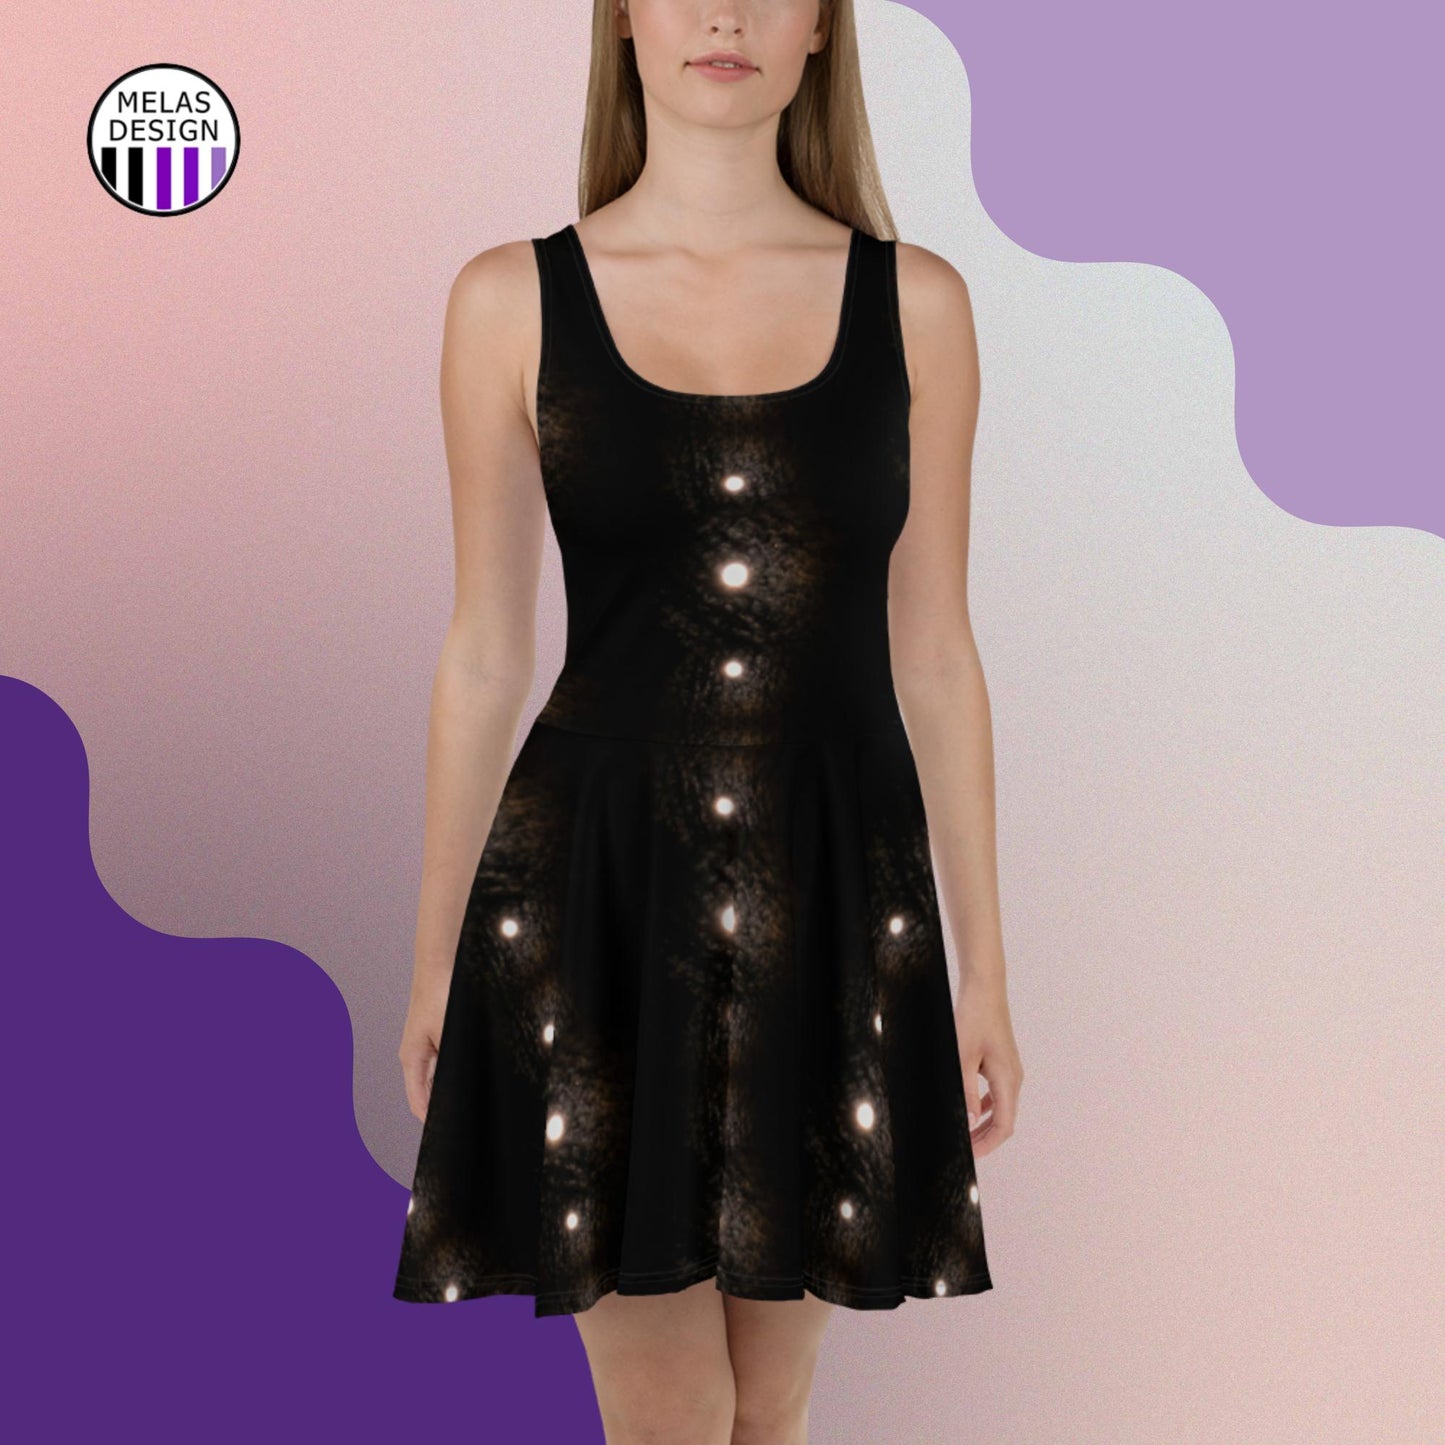 Full Moon in Dotted Stripes Skater Dress; Melasdesign; witchy; gothic; pagan; Summer; Spring; moon; full moon; fashion; style; dress; small business; witch aesthetic; 